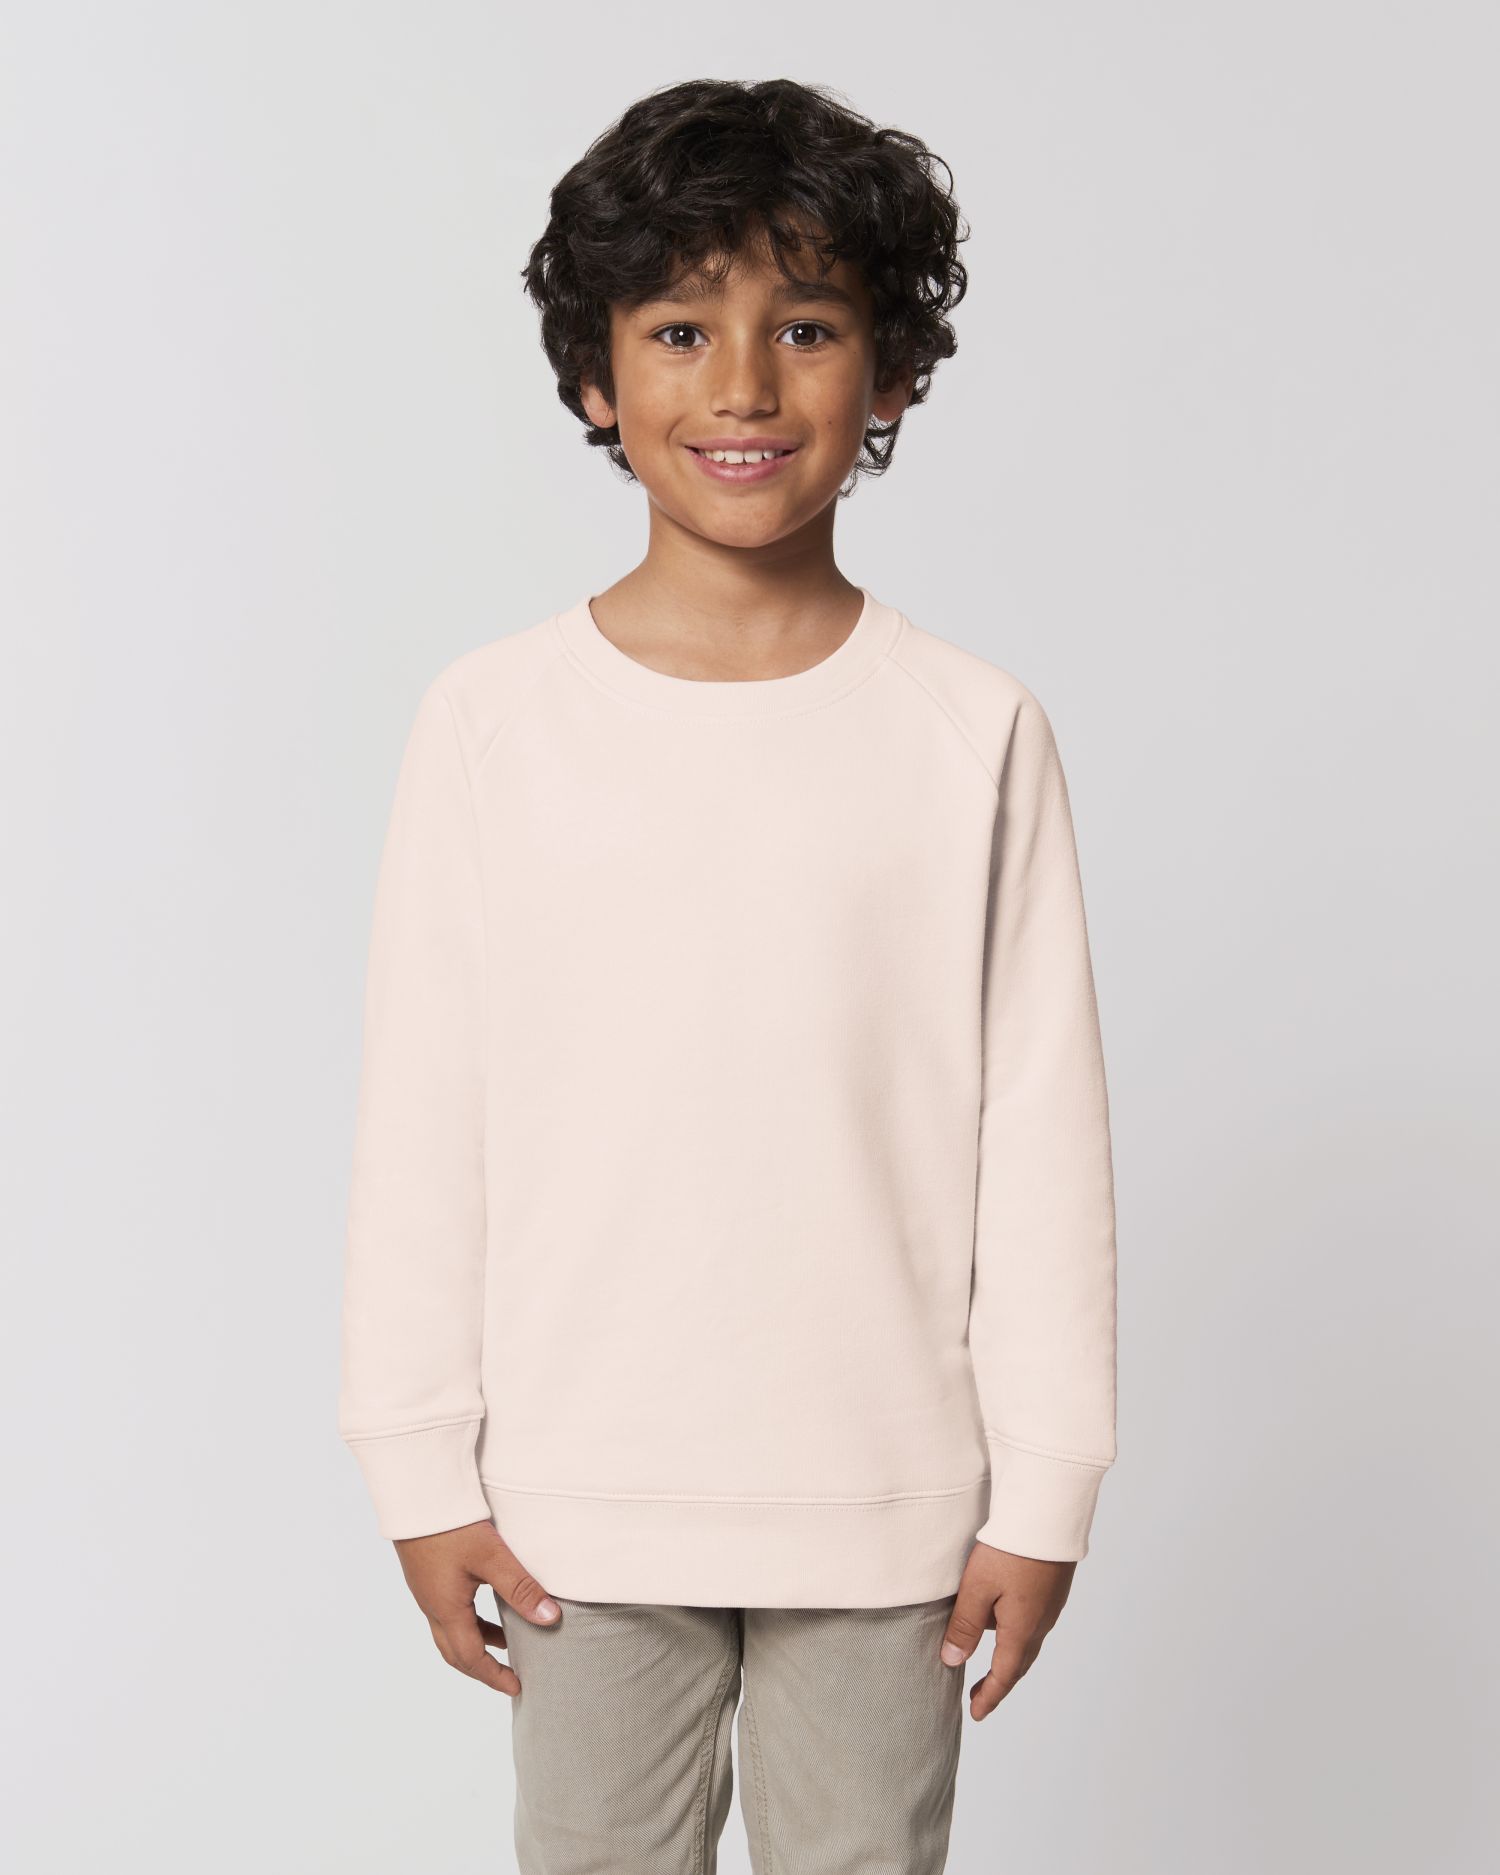 Kids Sweatshirt Mini Scouter in Farbe Candy Pink